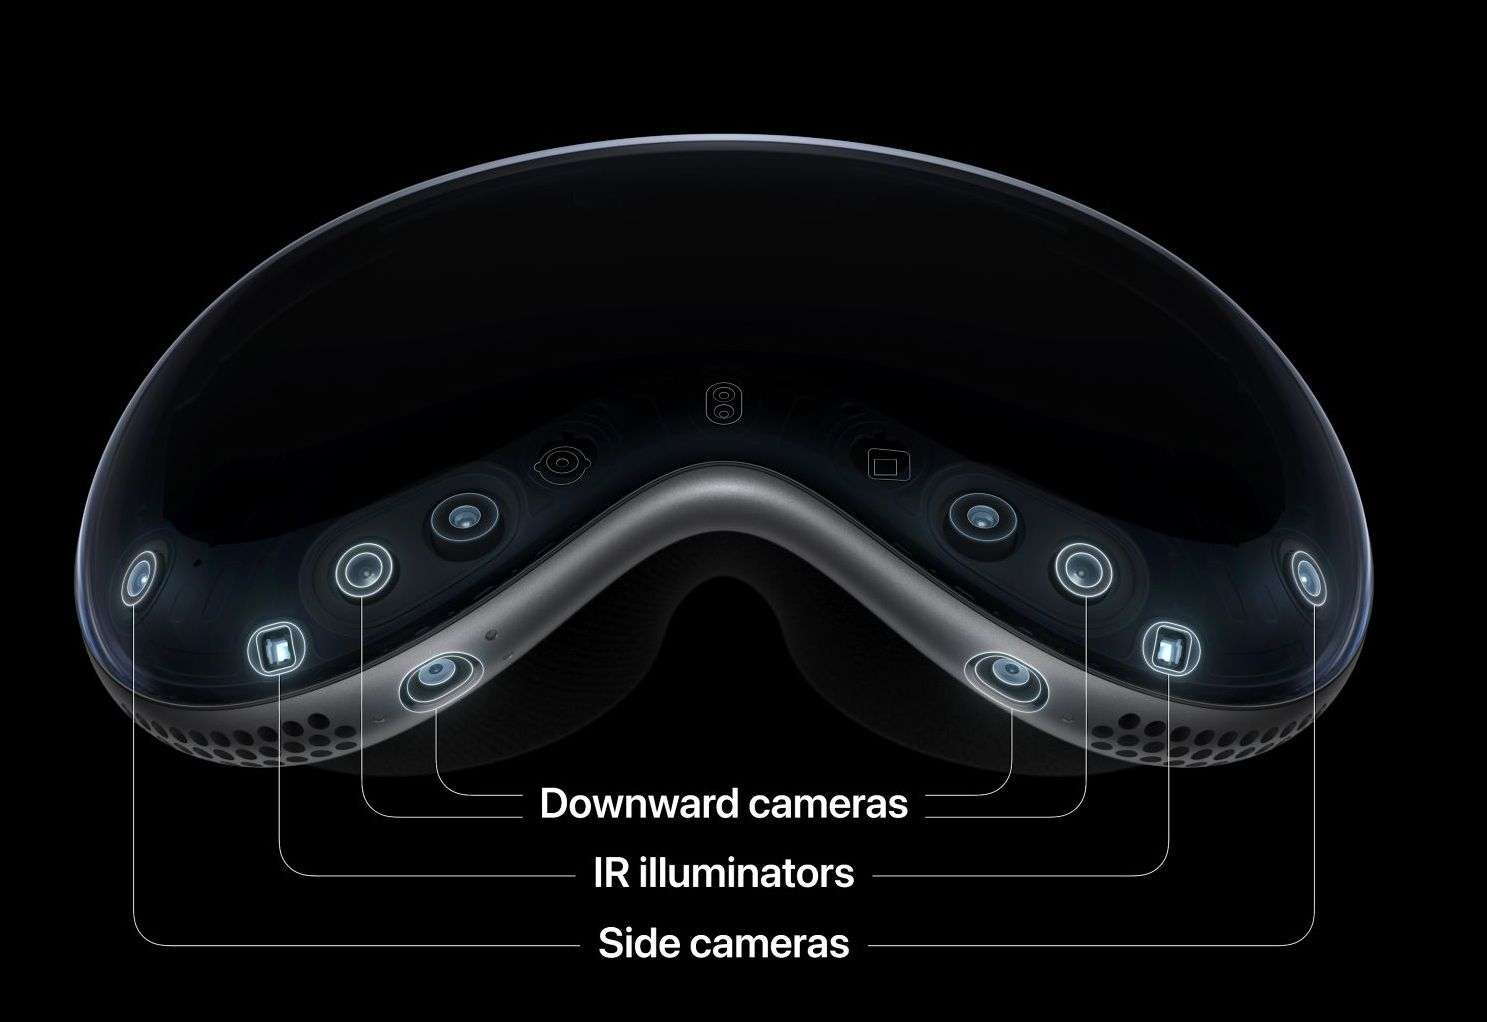 Close-up image of the advanced Infrared (IR) sensor technology used in Apple's Vision Pro, showcasing the innovative use of IR in eye and hand tracking for immersive mixed reality experiences.